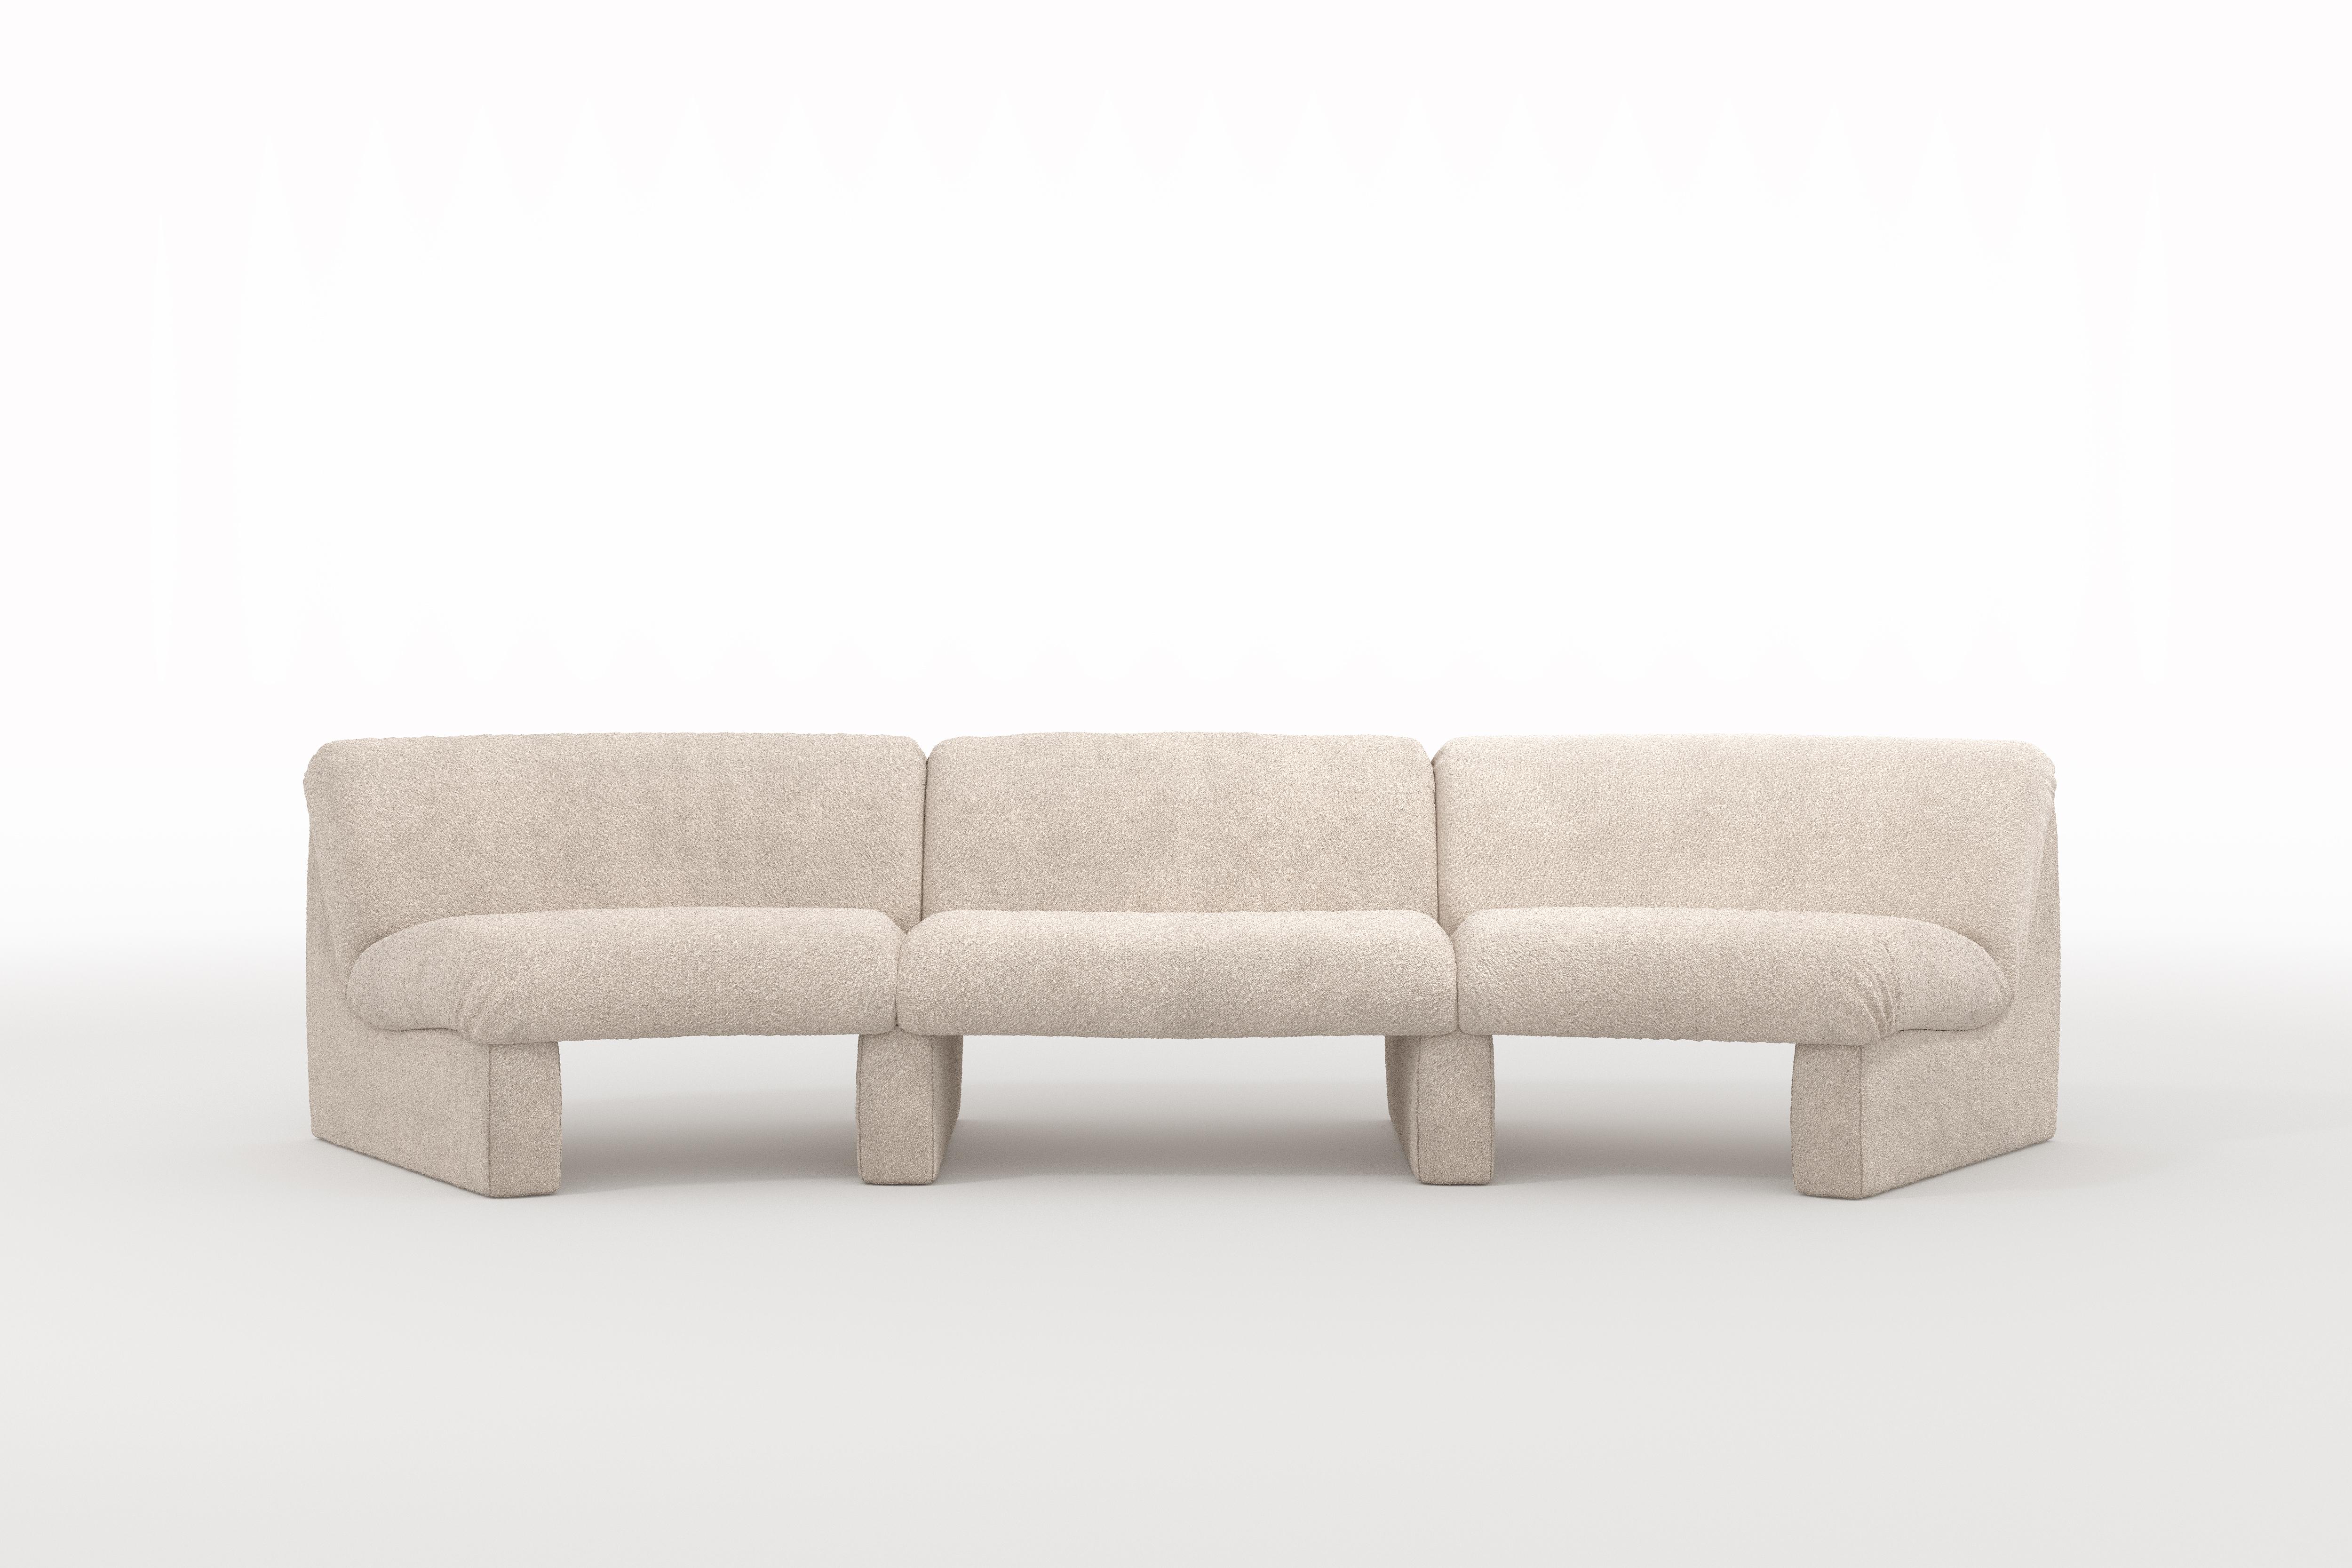 Snow modular sofa by Note Design Studio
Dimensions: D 100 x W 358 x H 74 cm.
Materials: Upholstery.
Seat and feet different fabrics.
This modular sofa is composed of: 
1 x Module 02 : curve 30°
1 x Module 01 : straight
1 x Module 02 : curve